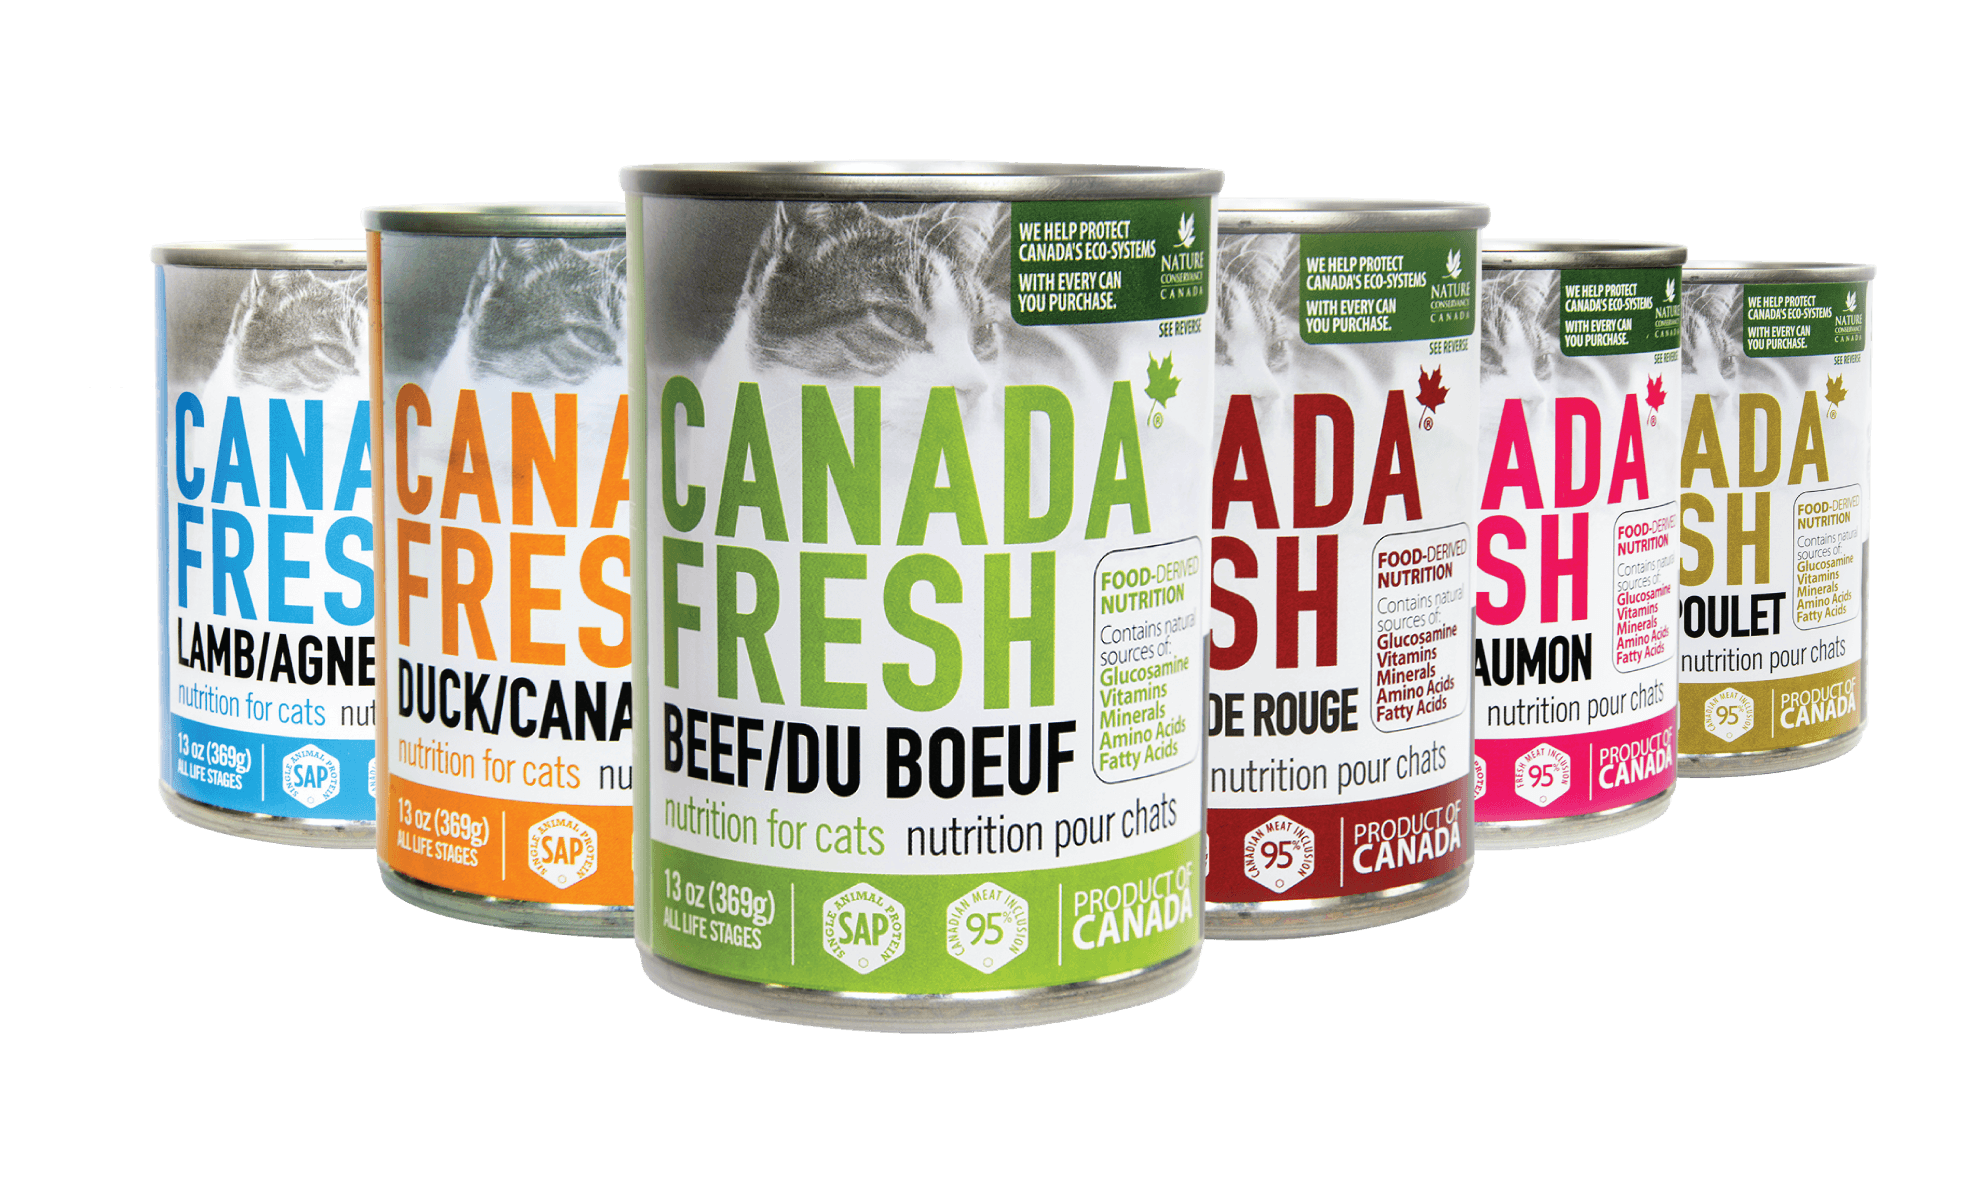 13 oz cans of all variants of Canada Fresh cat range